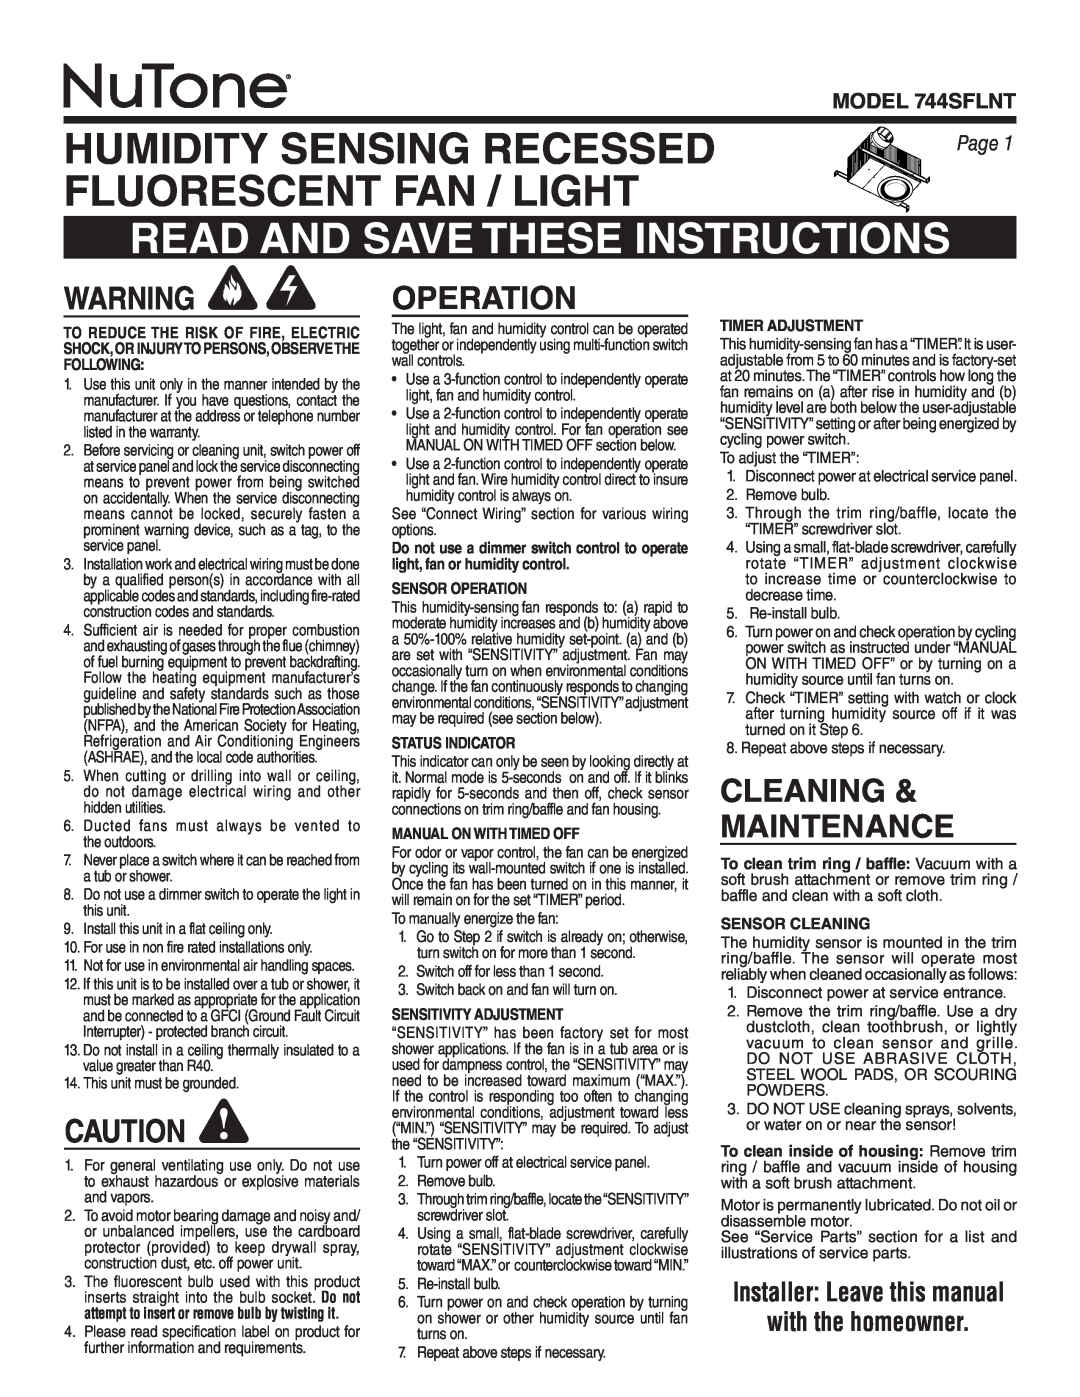 NuTone 744SFLNT warranty Humidity Sensing Recessed, Fluorescent Fan / Light, Read And Save These Instructions, Page 